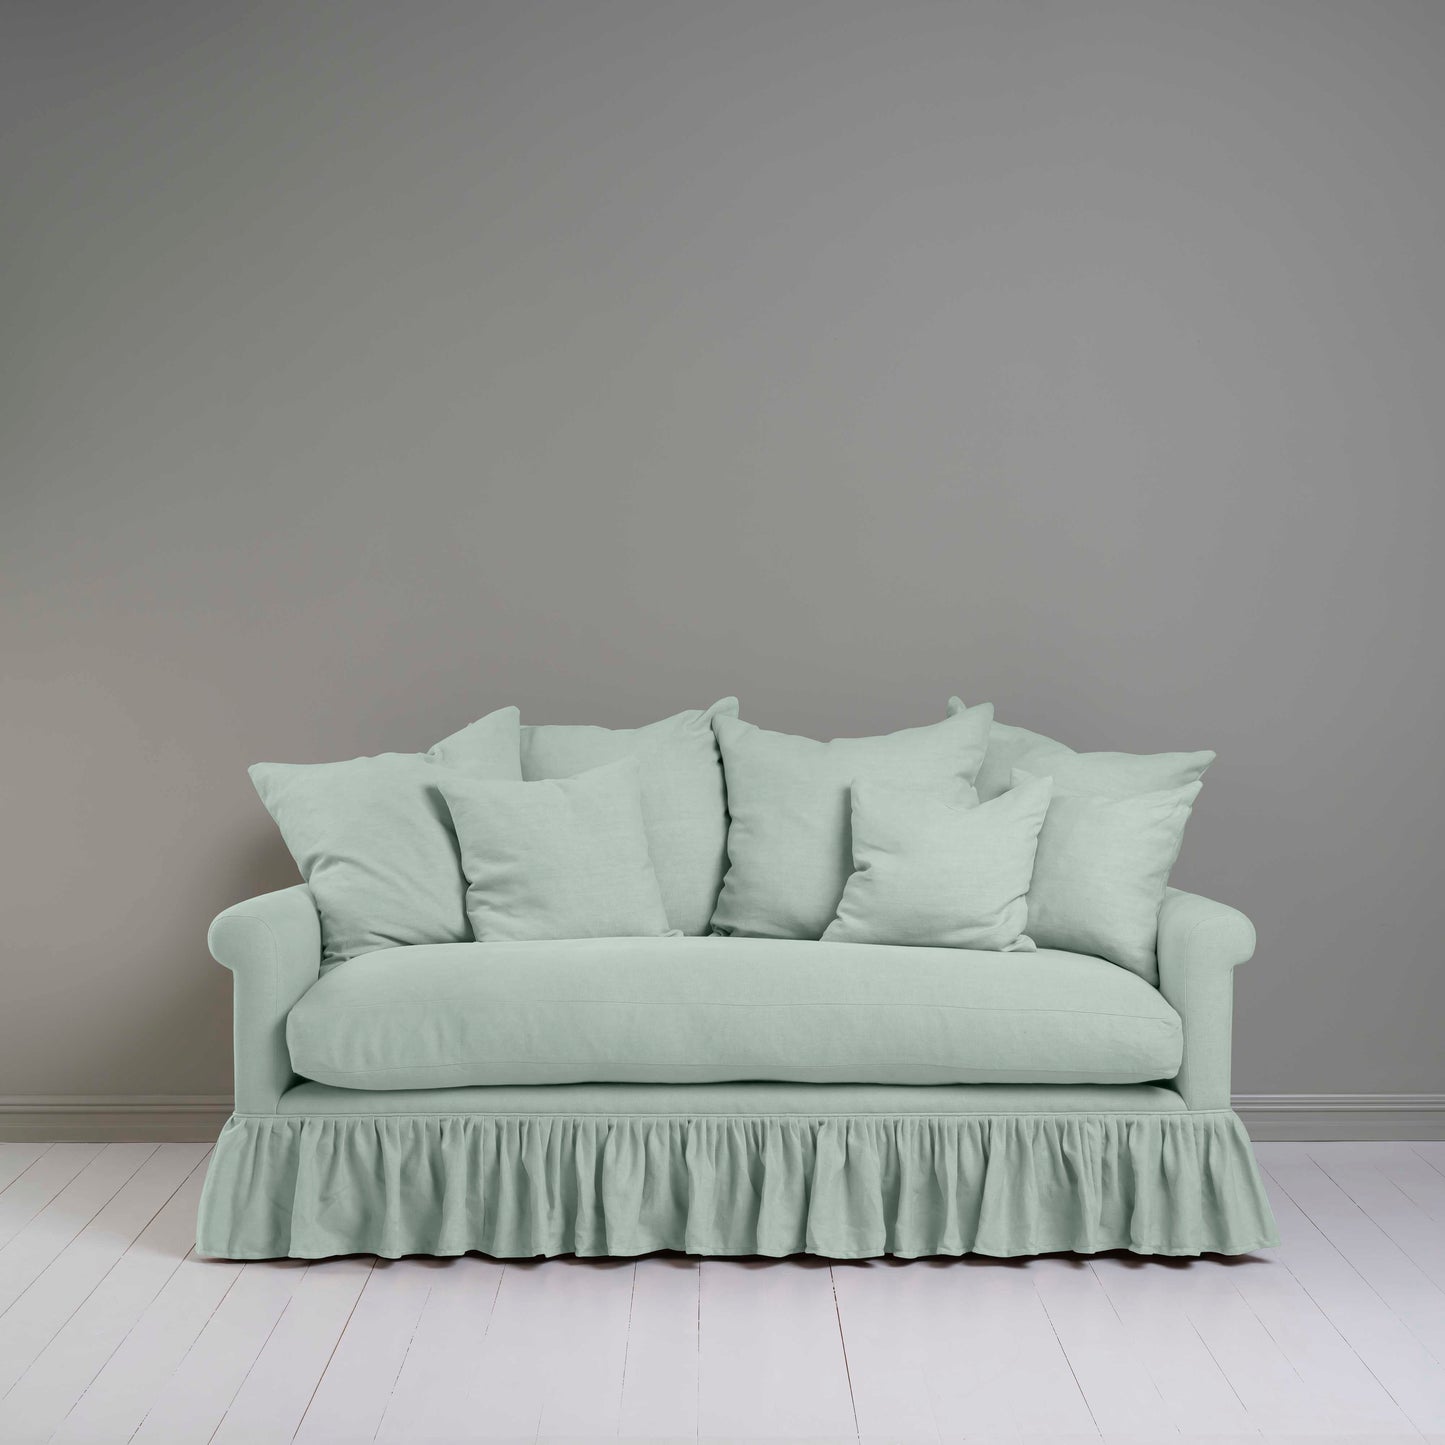 Curtain Call 3 Seater Sofa in Laidback Linen Sky